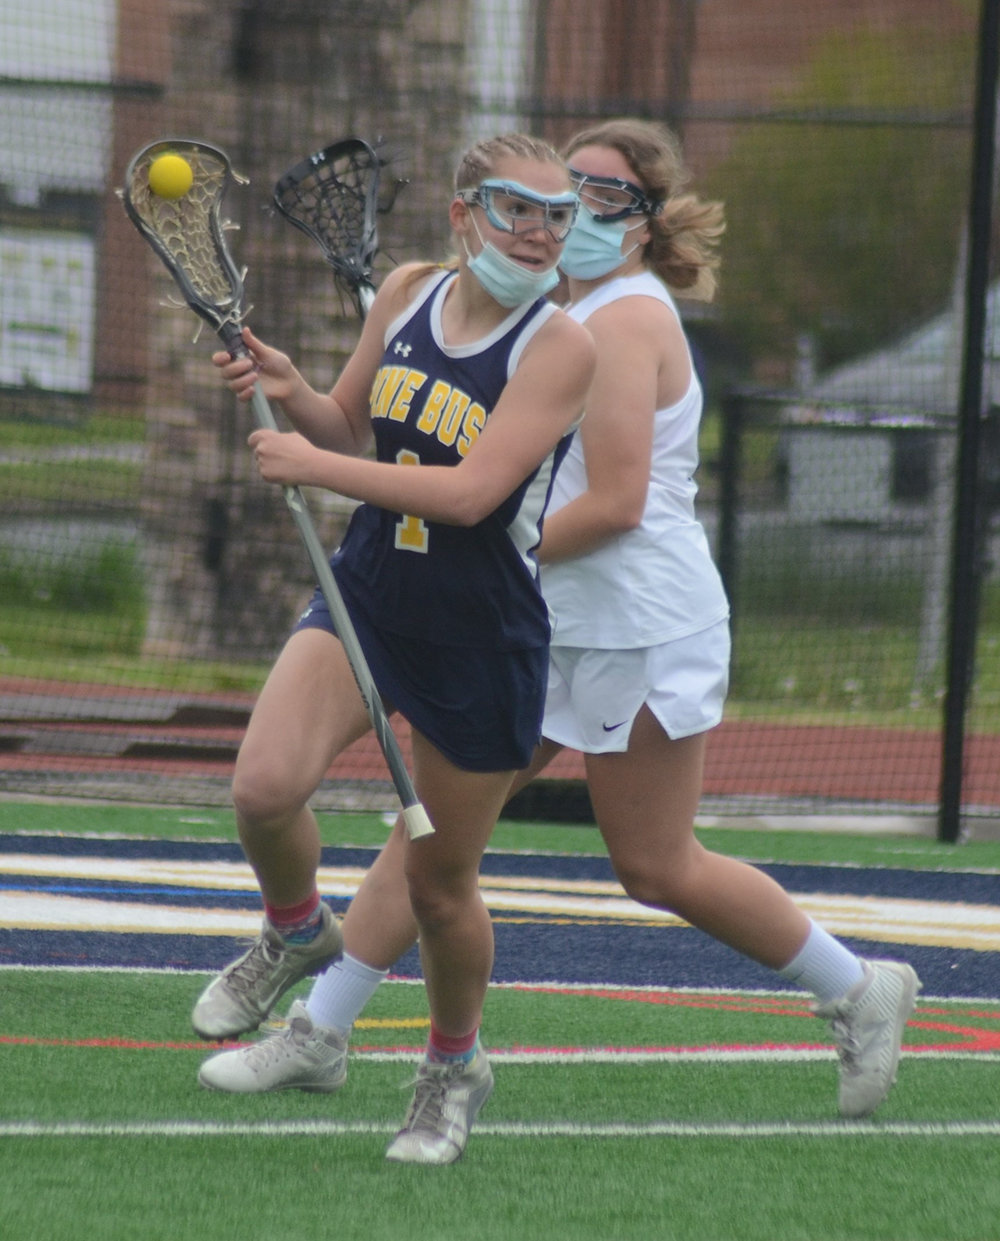 Pine Bush’s Alexandra Watkins carries the ball forward as Newburgh’s Mikayla Marrero defends during a girls’ lacrosse game at Academy Field in Newburgh on May 10.